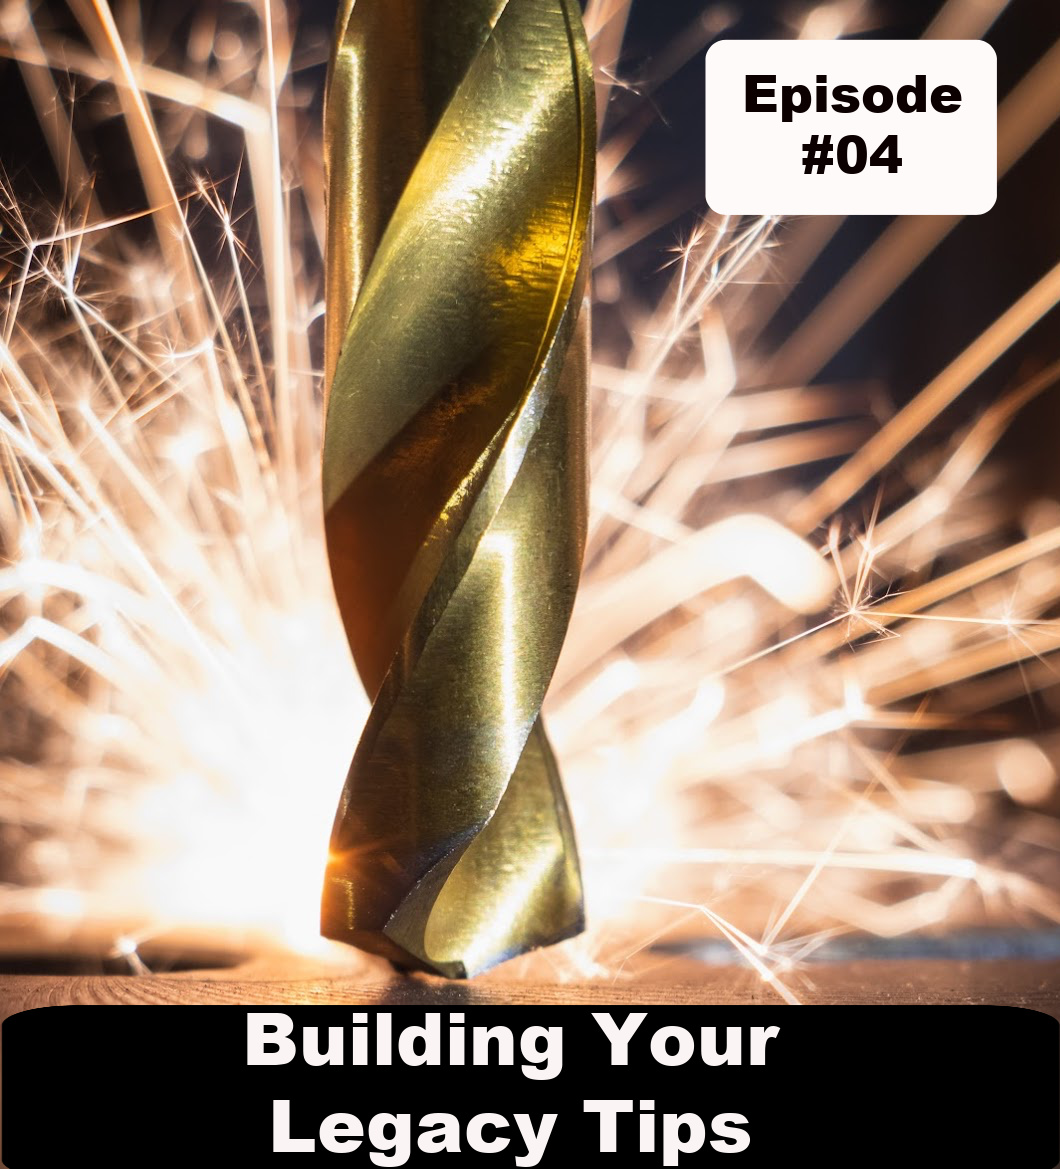 Building Your Legacy Tips-Ep#04 “Passion, It’s in there.”